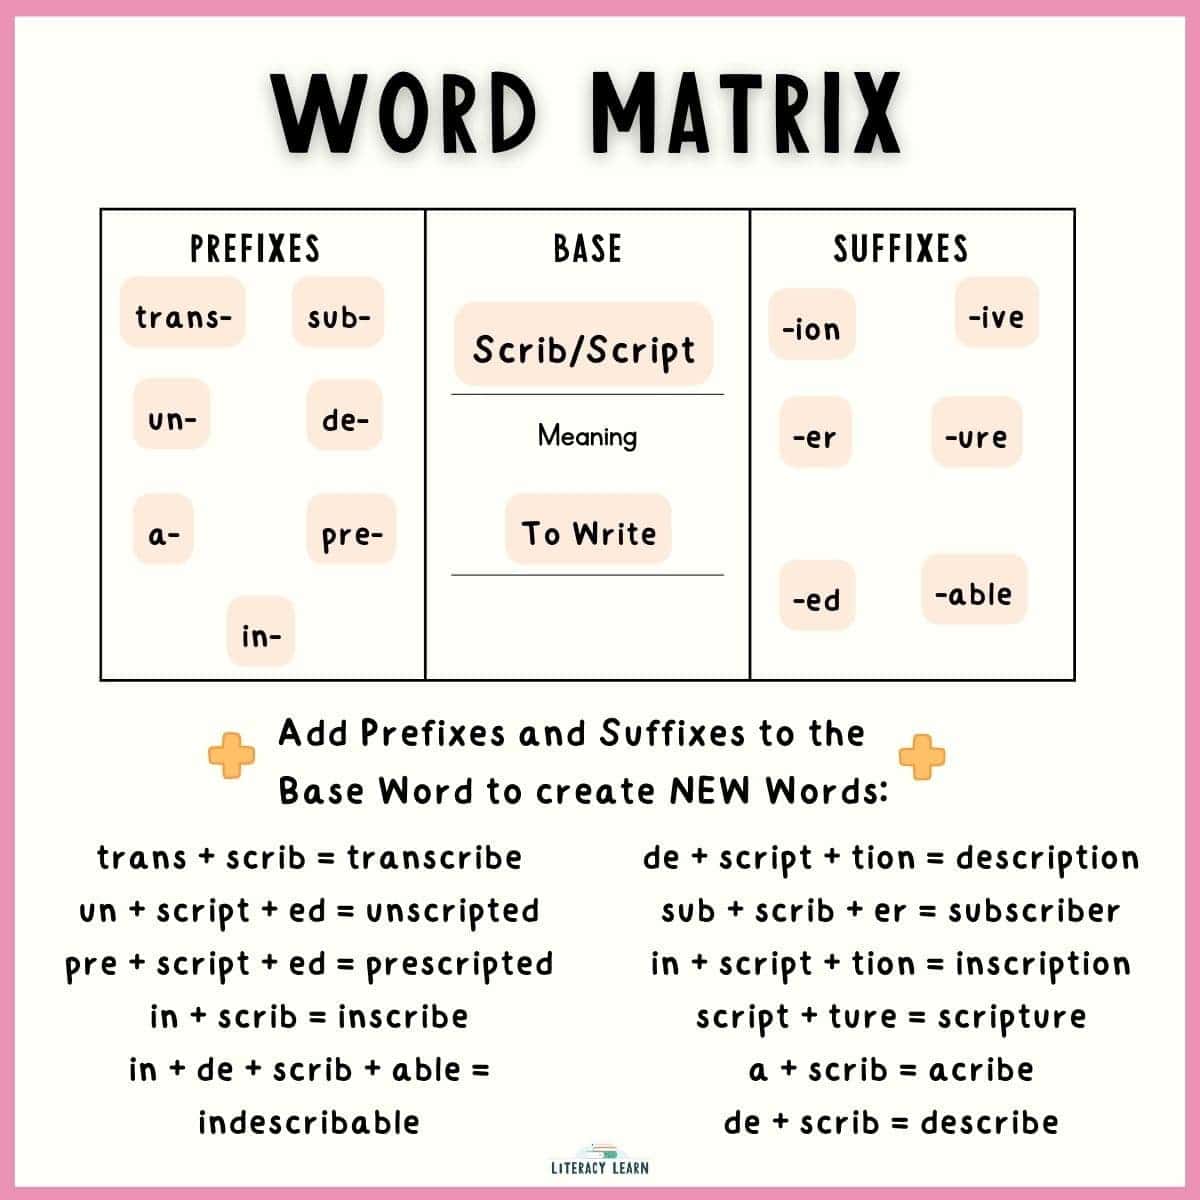 Graphic showing completed word matrix using the base word 'scrib/script' with prefixes, suffixes, and new words.